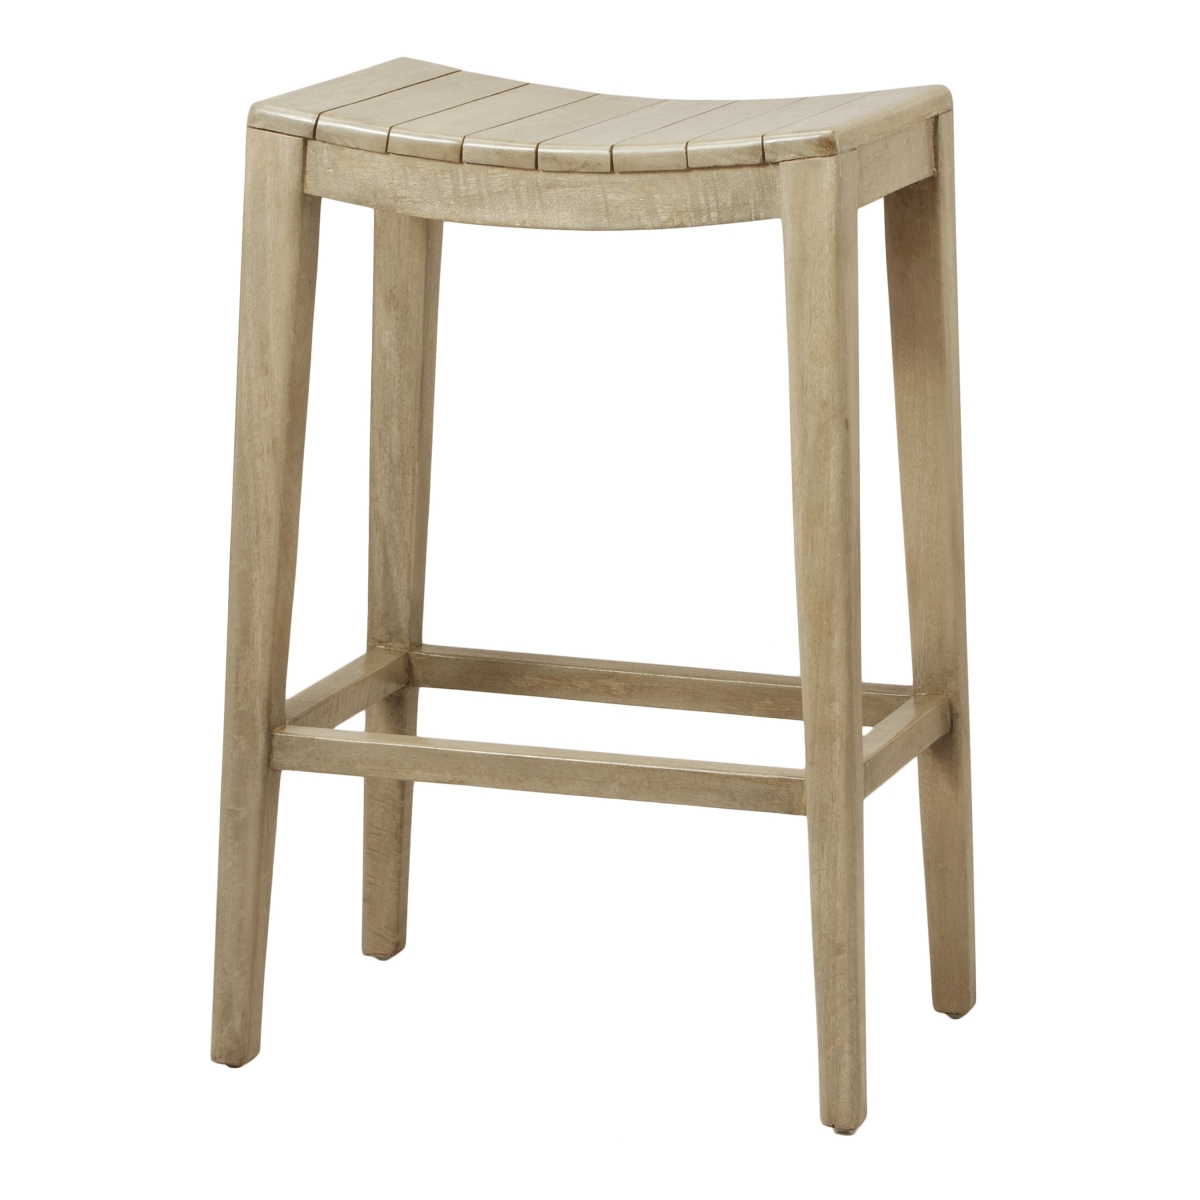 6600011-wg 13 X 18.5 X 30 In. Elmo Wooden Bar Stool, Washed Gray